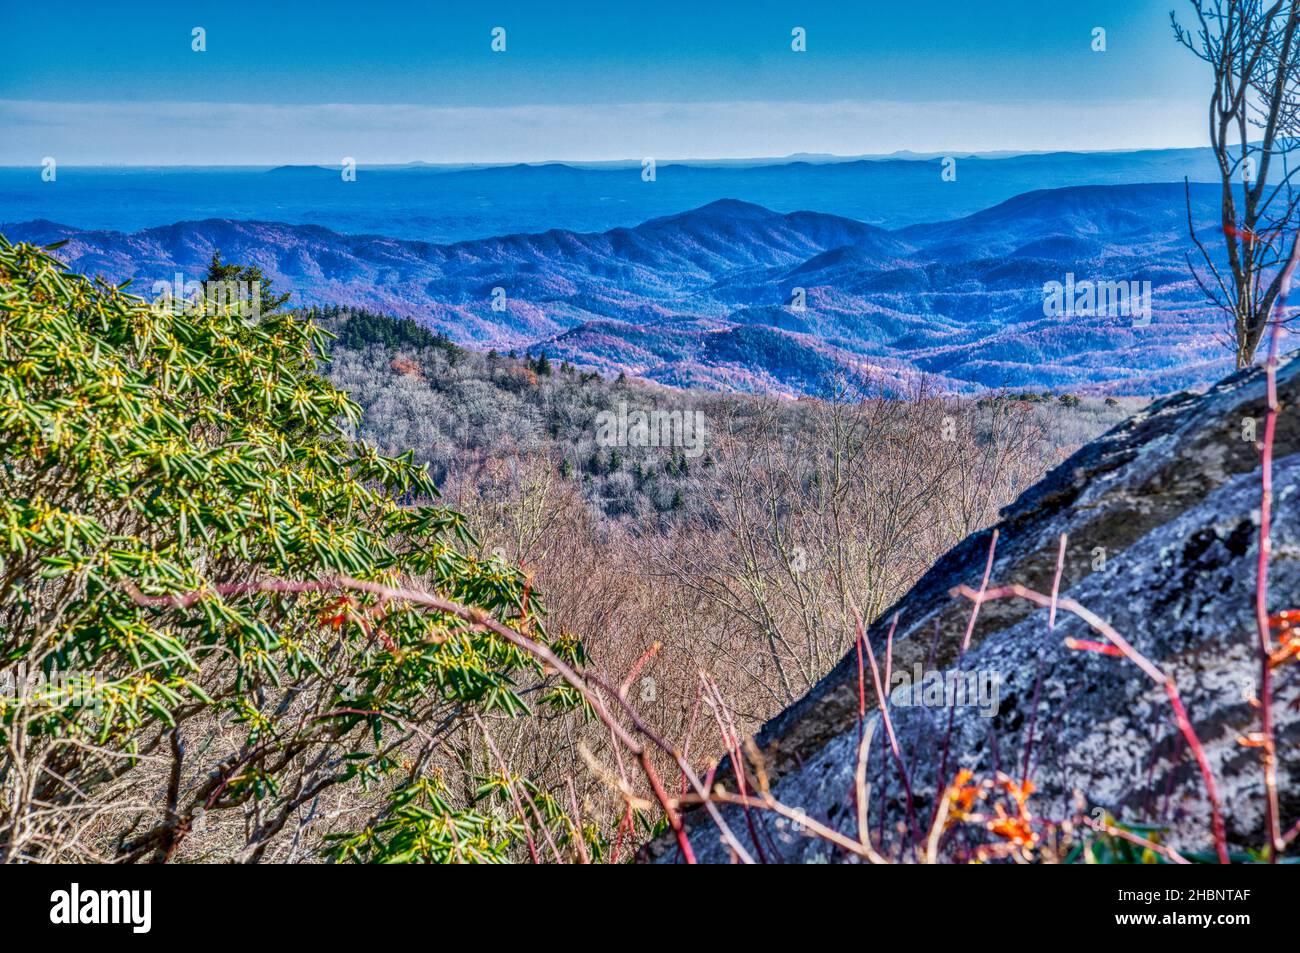 A vista of the Blue Ridge Mountains seen from Grandfather Mountain in Linville, North Carolina. Stock Photo